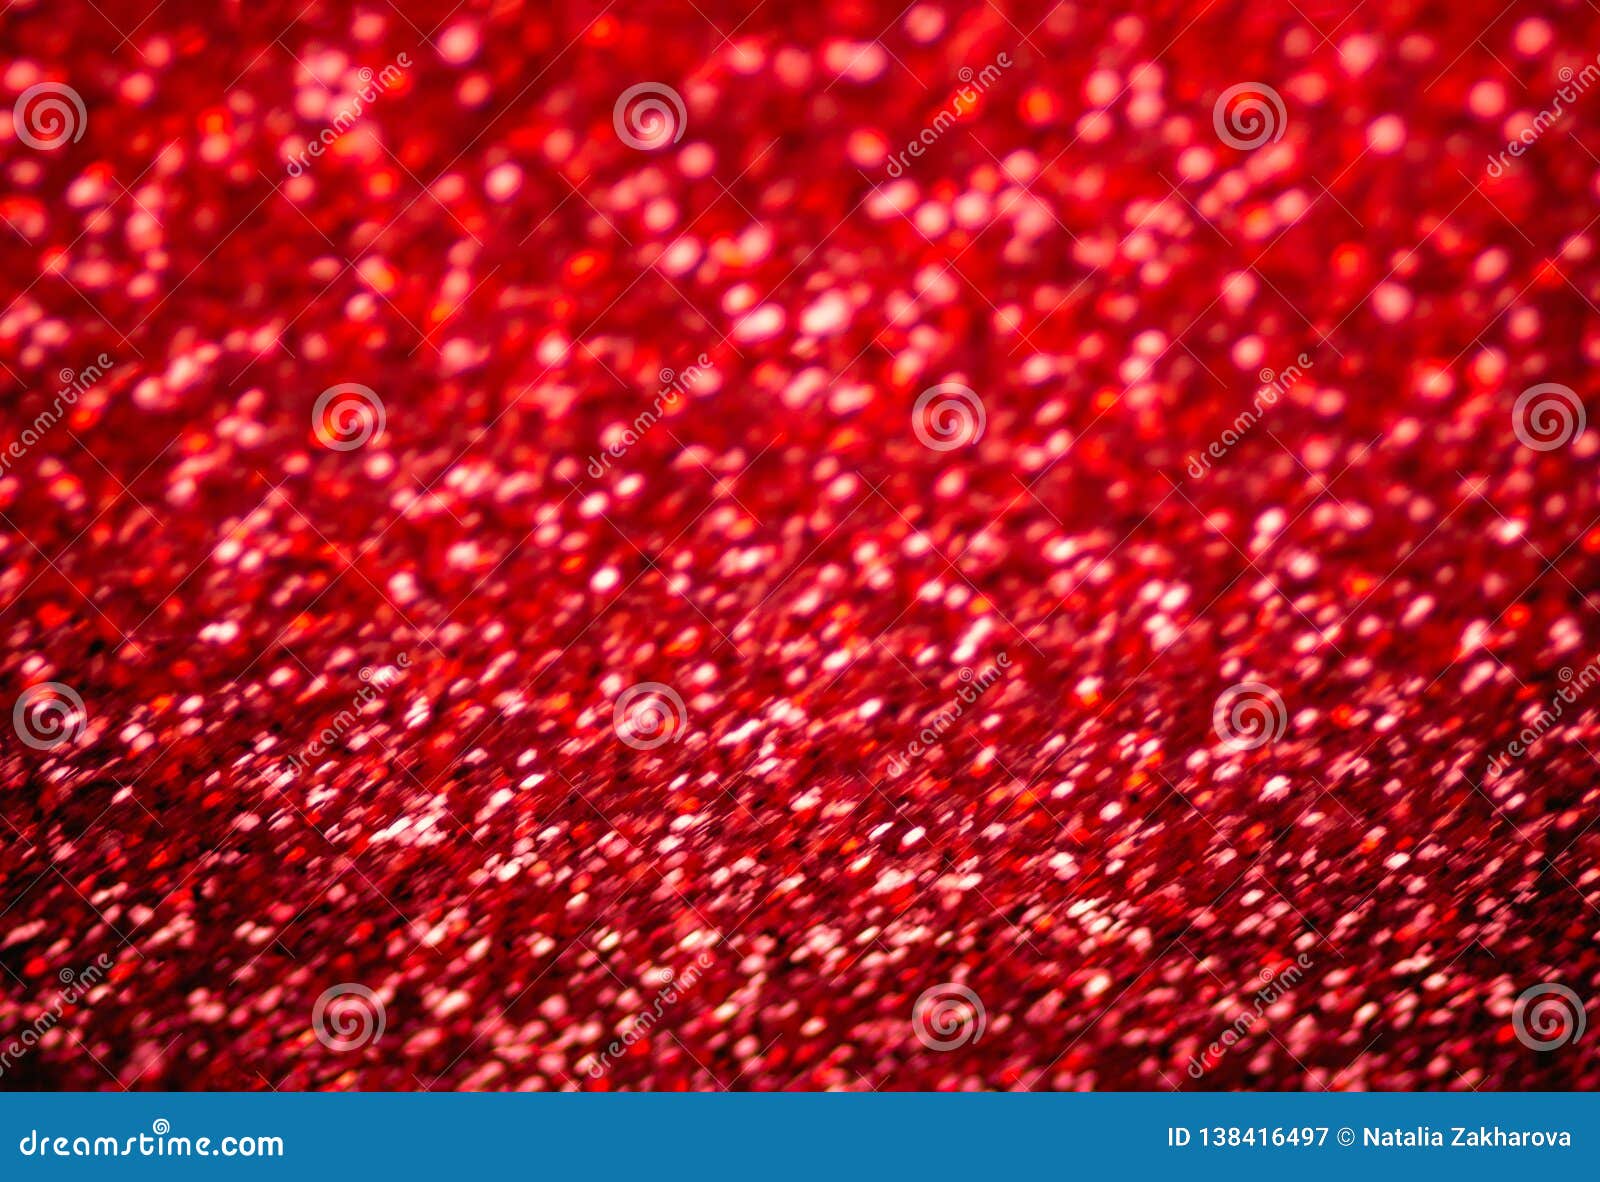 Red and Black Glitter Vintage Lights Background for Valentines Day and